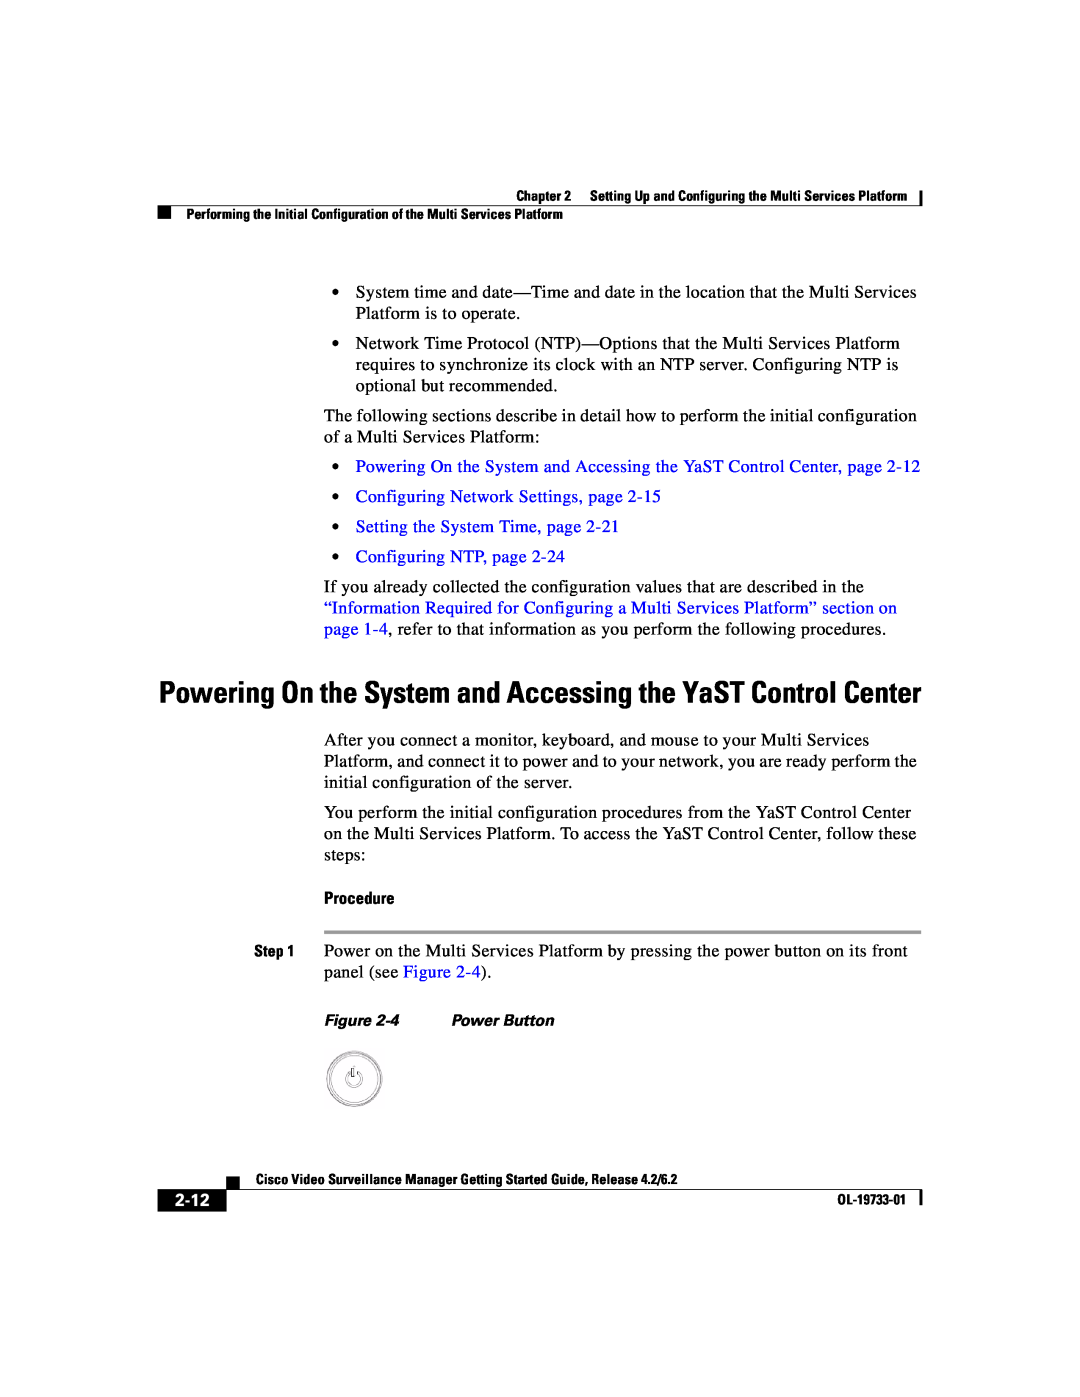 Cisco Systems Powering On the System and Accessing the YaST Control Center, Configuring NTP, page, Procedure, 2-12 